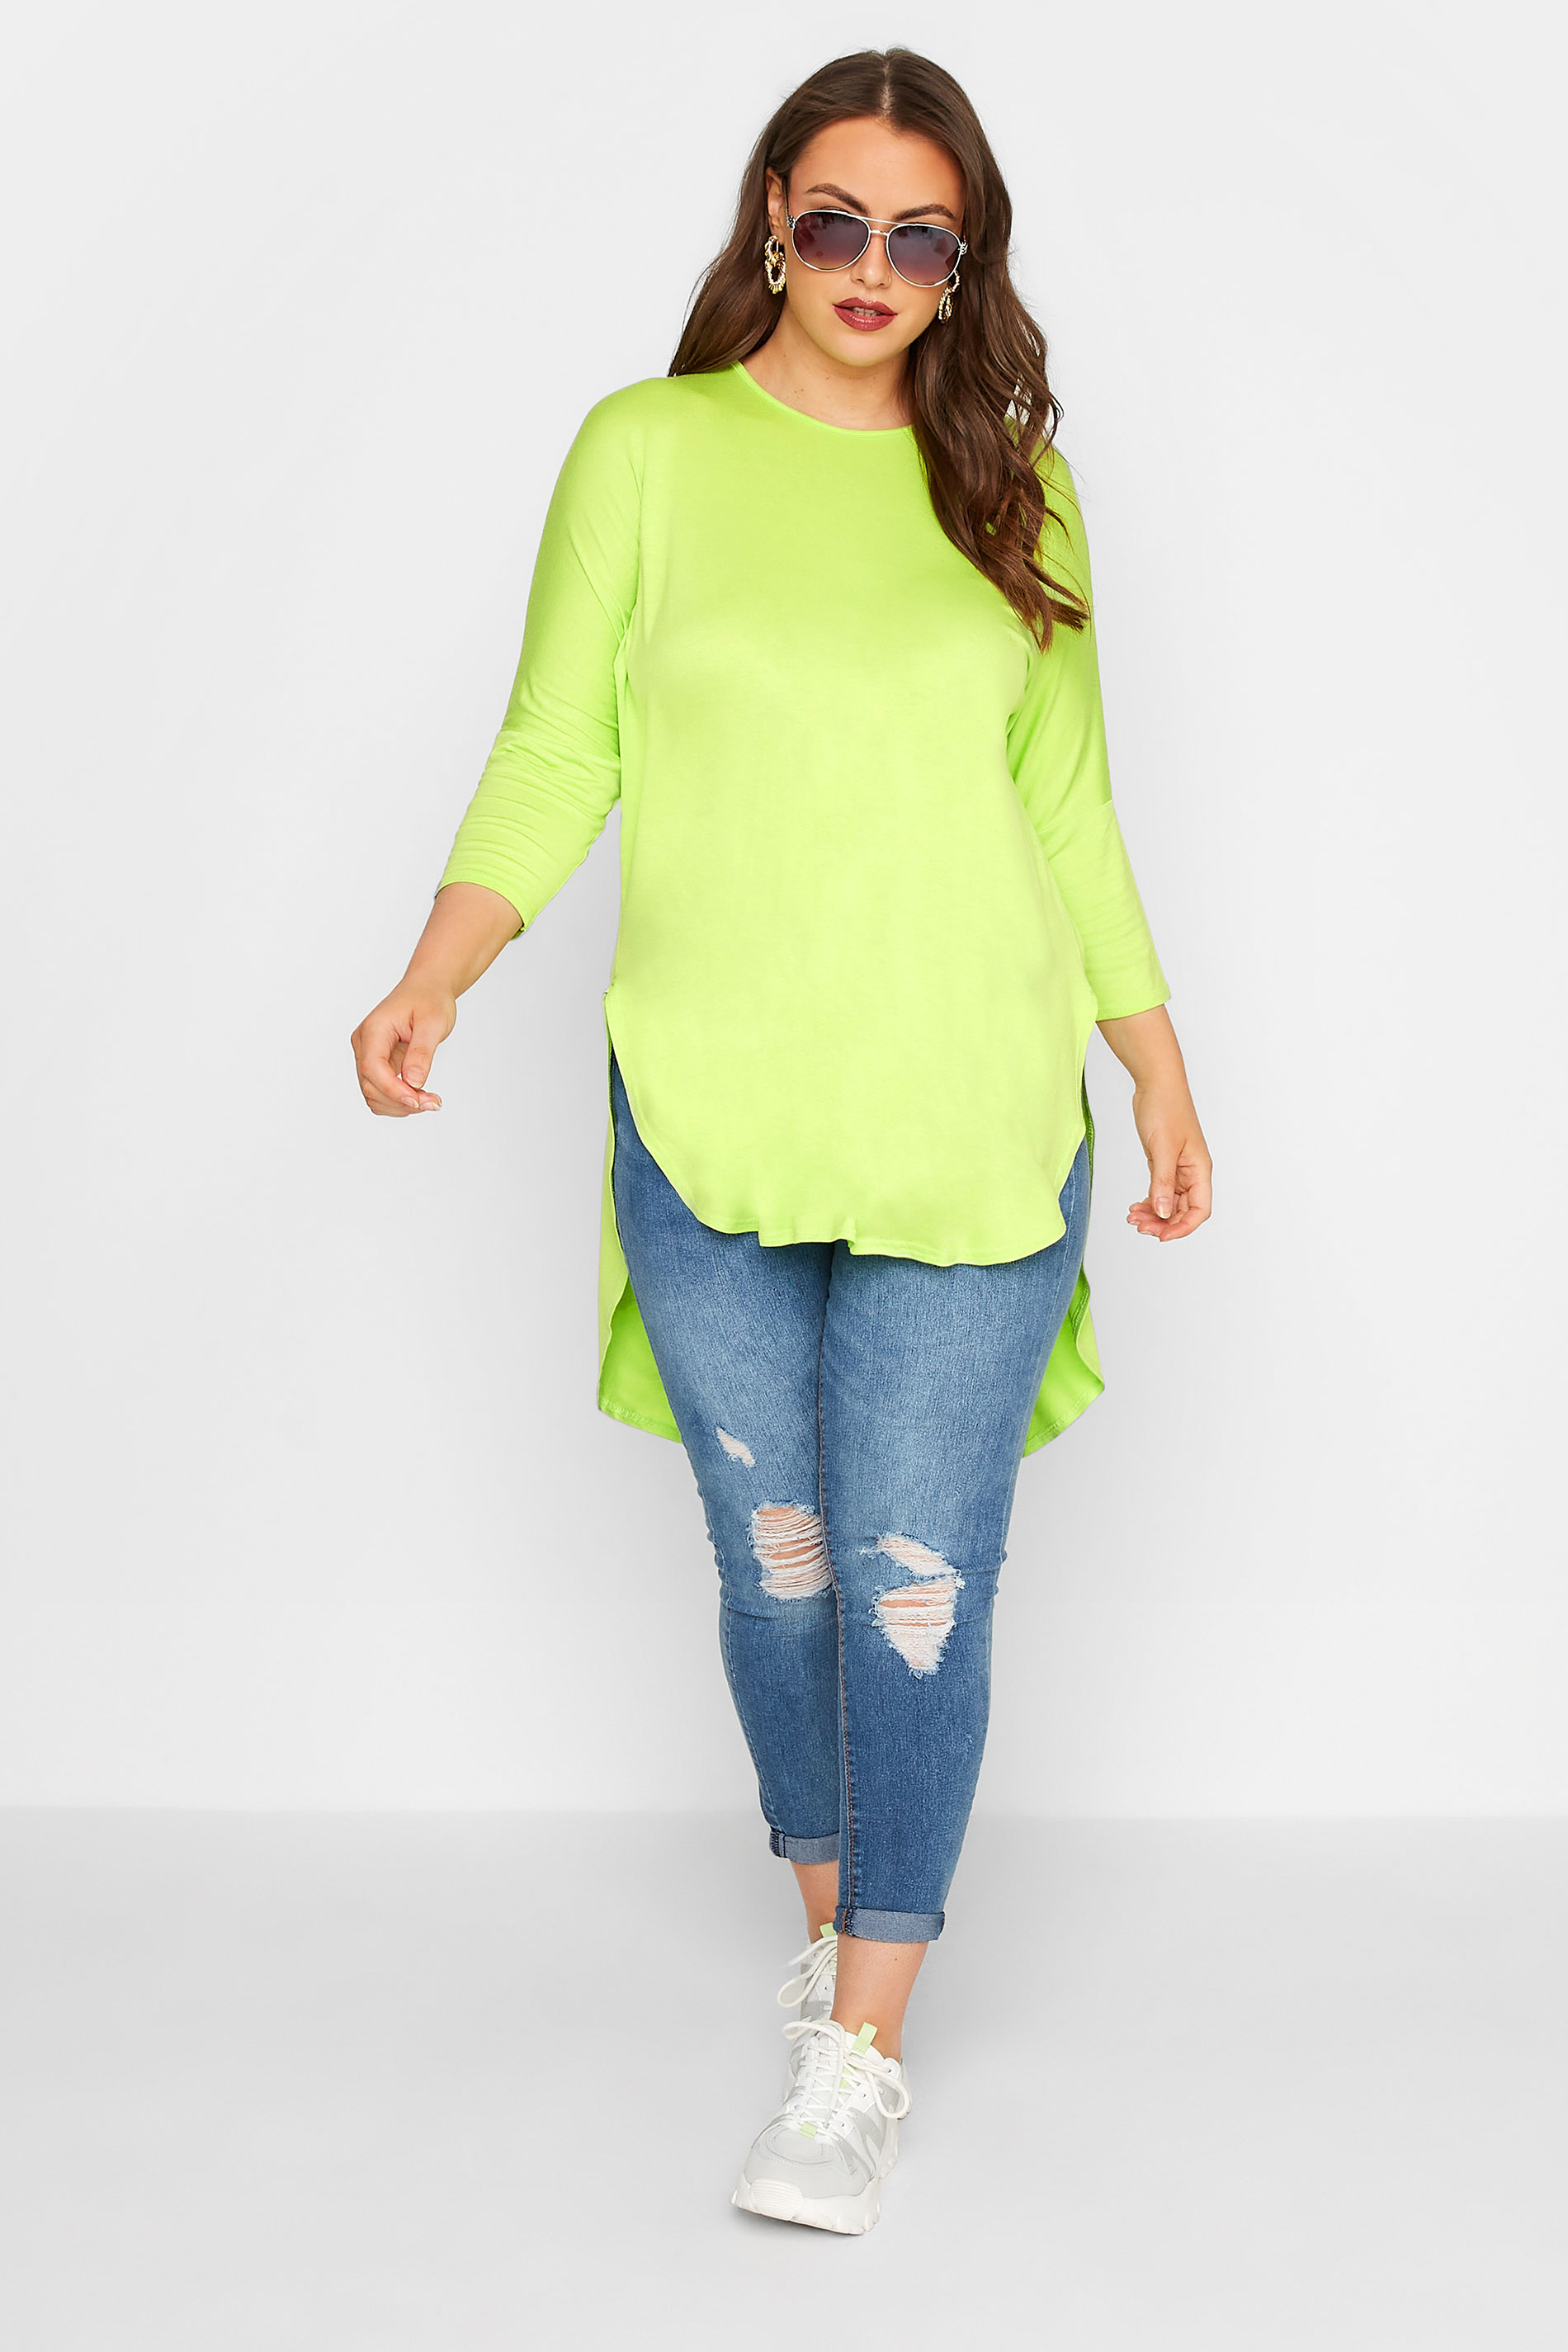 Grande taille  Tops Grande taille  Tops Ourlet Plongeant | LIMITED COLLECTION - T-Shirt Vert Citron Manches Longues Ourlet Plongeant - RY98788